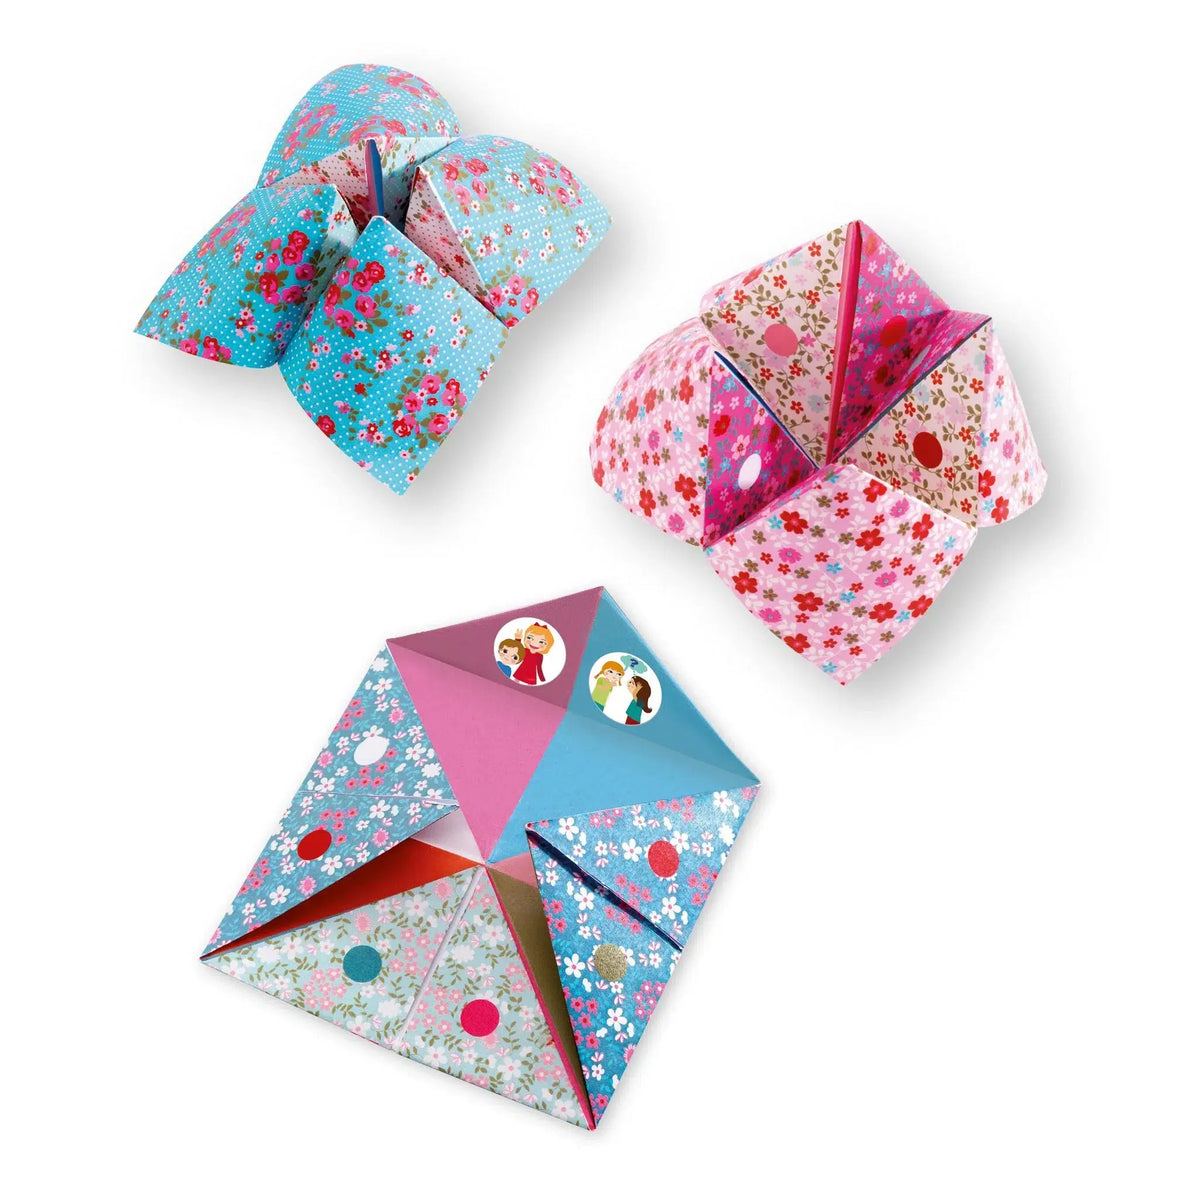 3 completed fortune tellers, sitting at different angles against a white background.